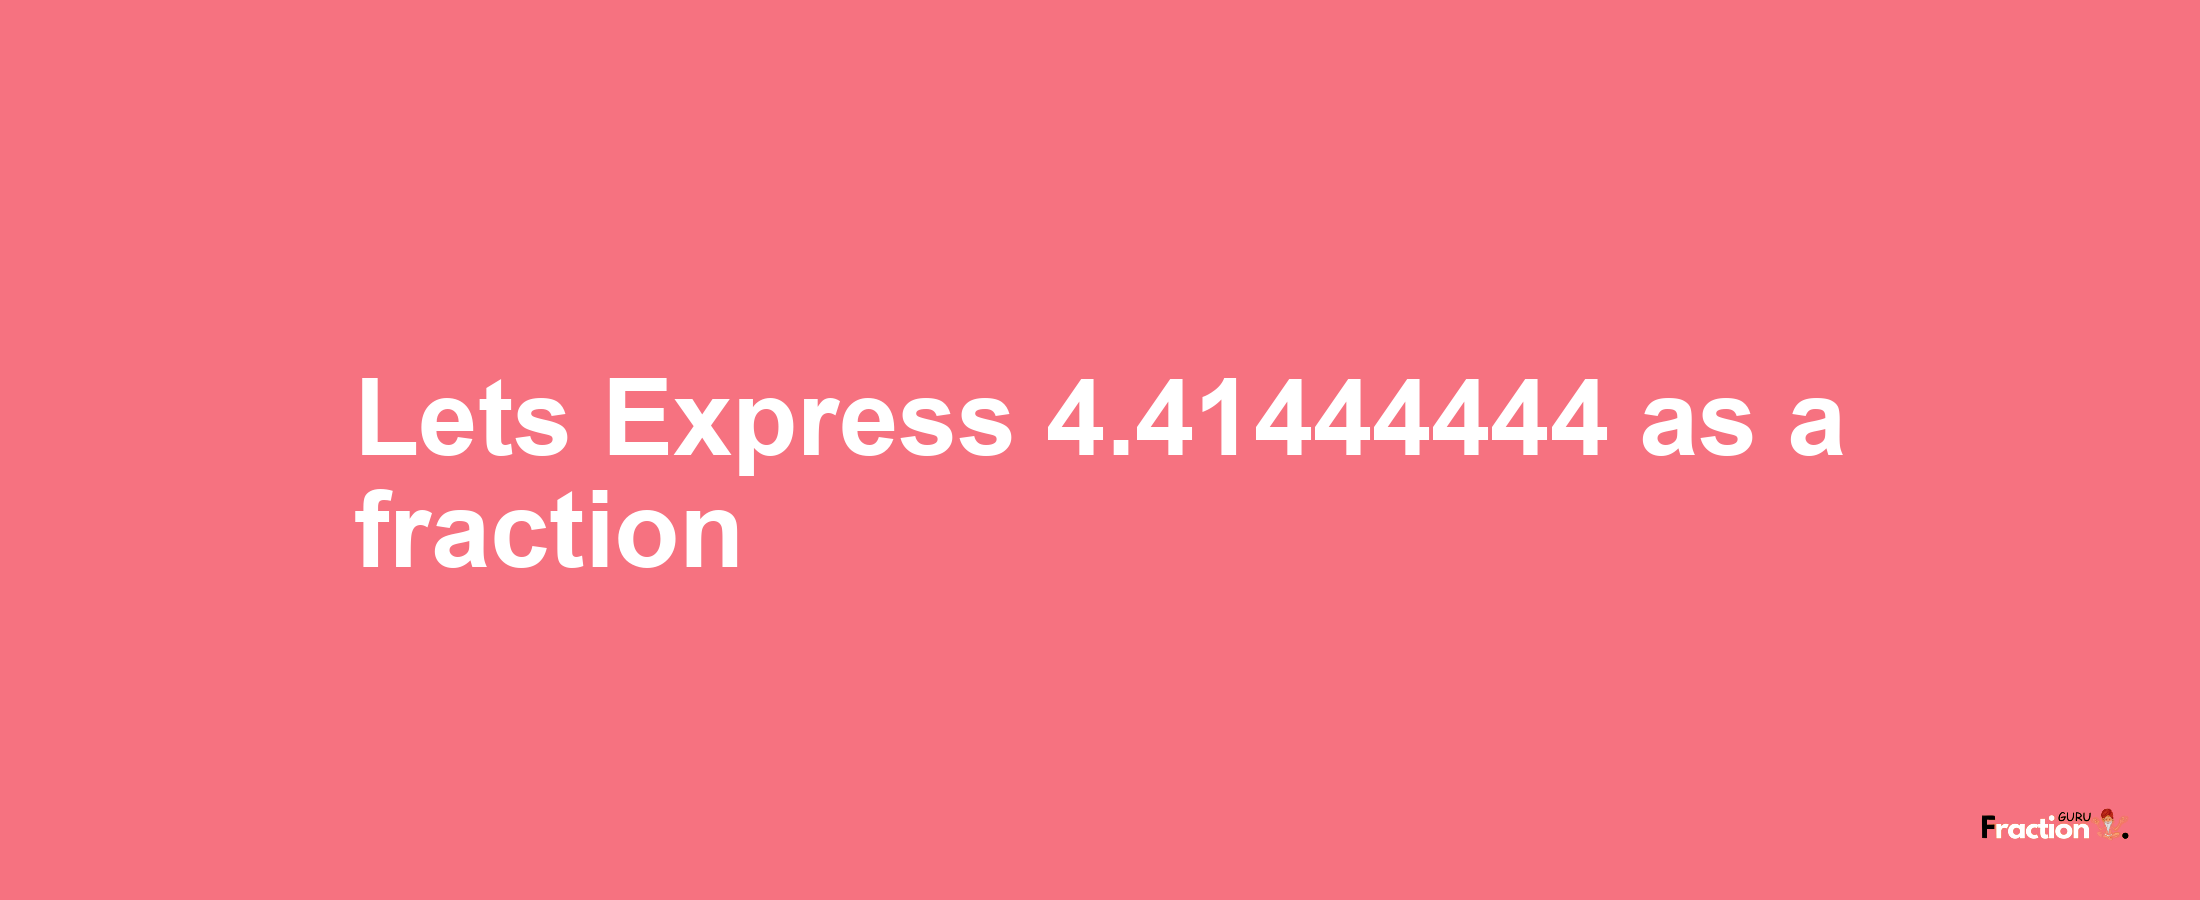 Lets Express 4.41444444 as afraction